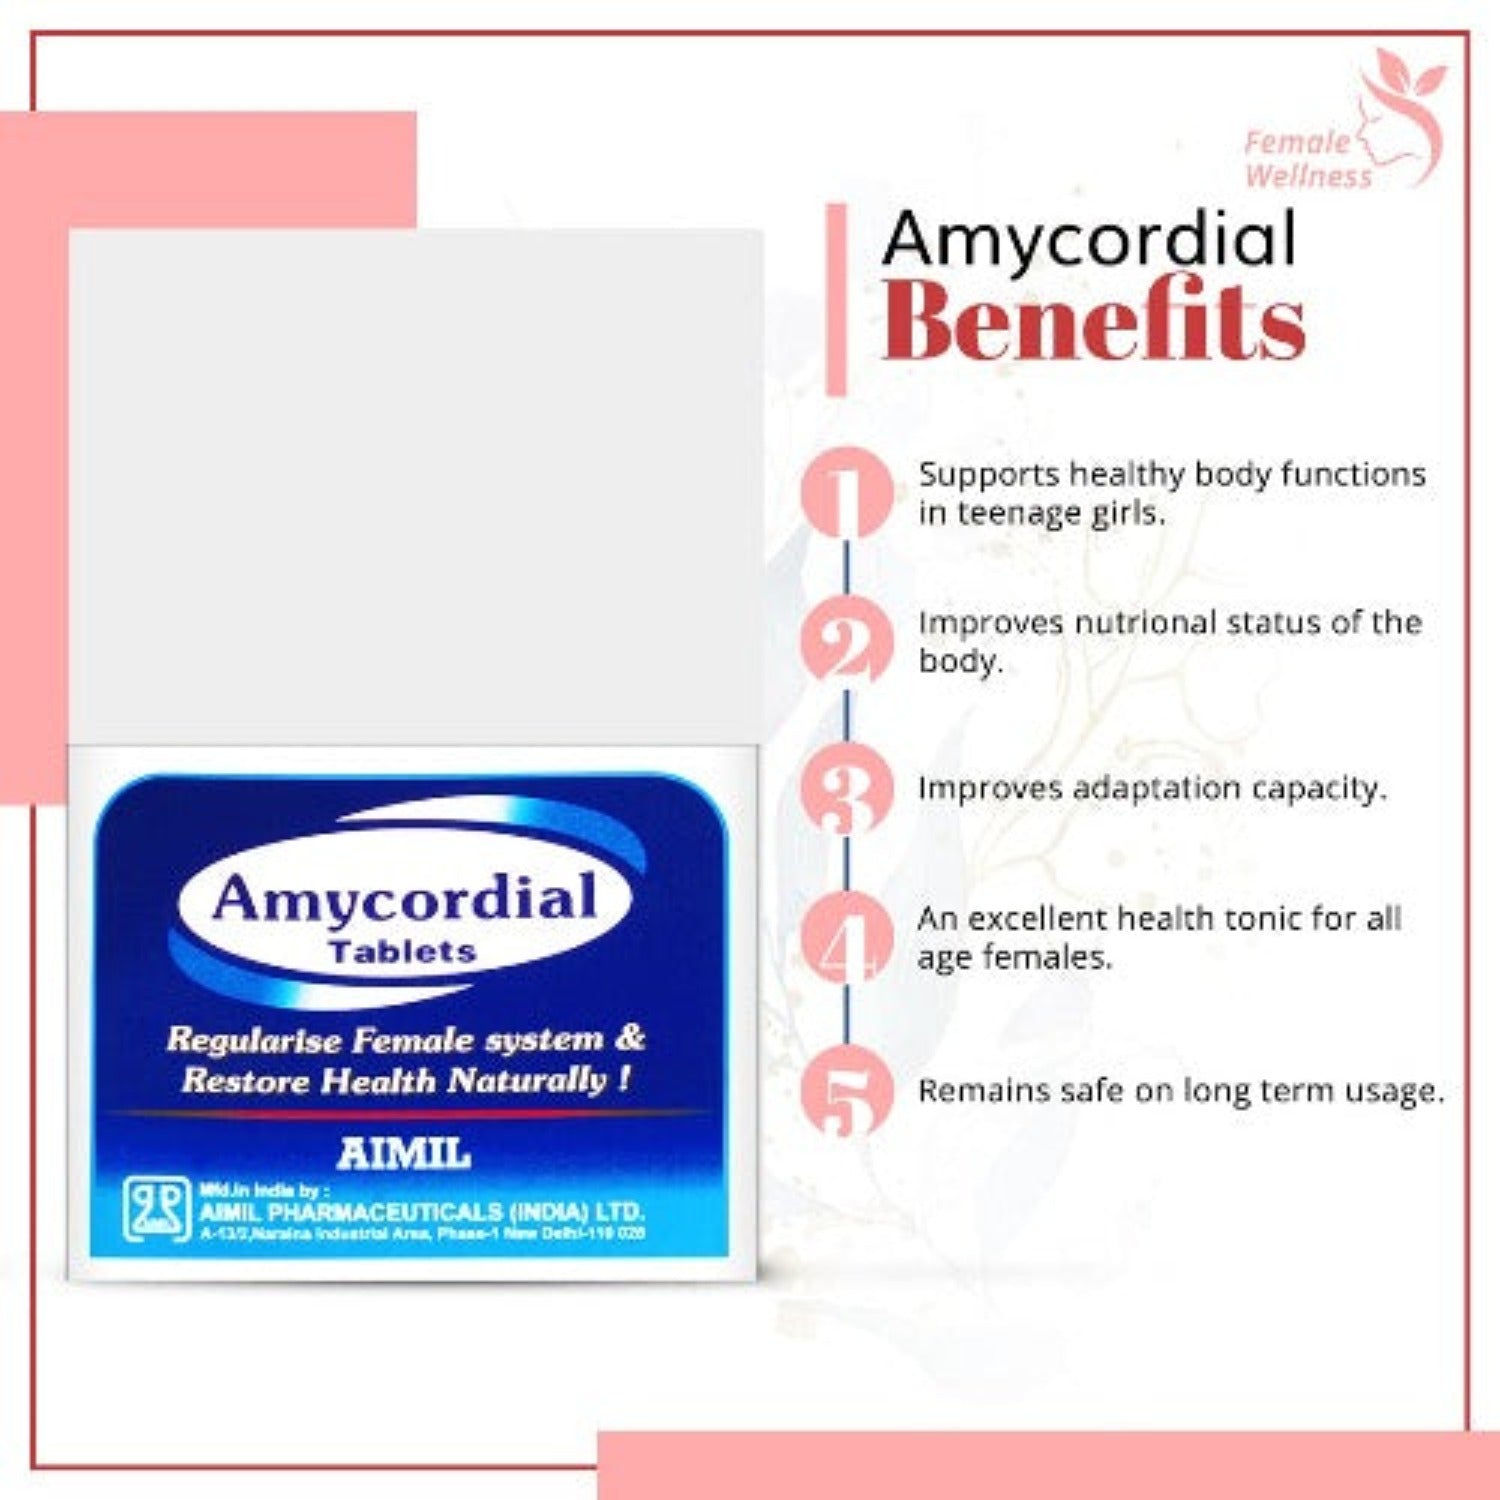 Aimil Ayurvedic Amycordial Nourishment Health Tonic For Women Effectively Maintains And Nourishes The Female System Also Supports Healthy Body Functions In Teenage Girls For Women's Wellness Forte Syrup & Fort Tablets